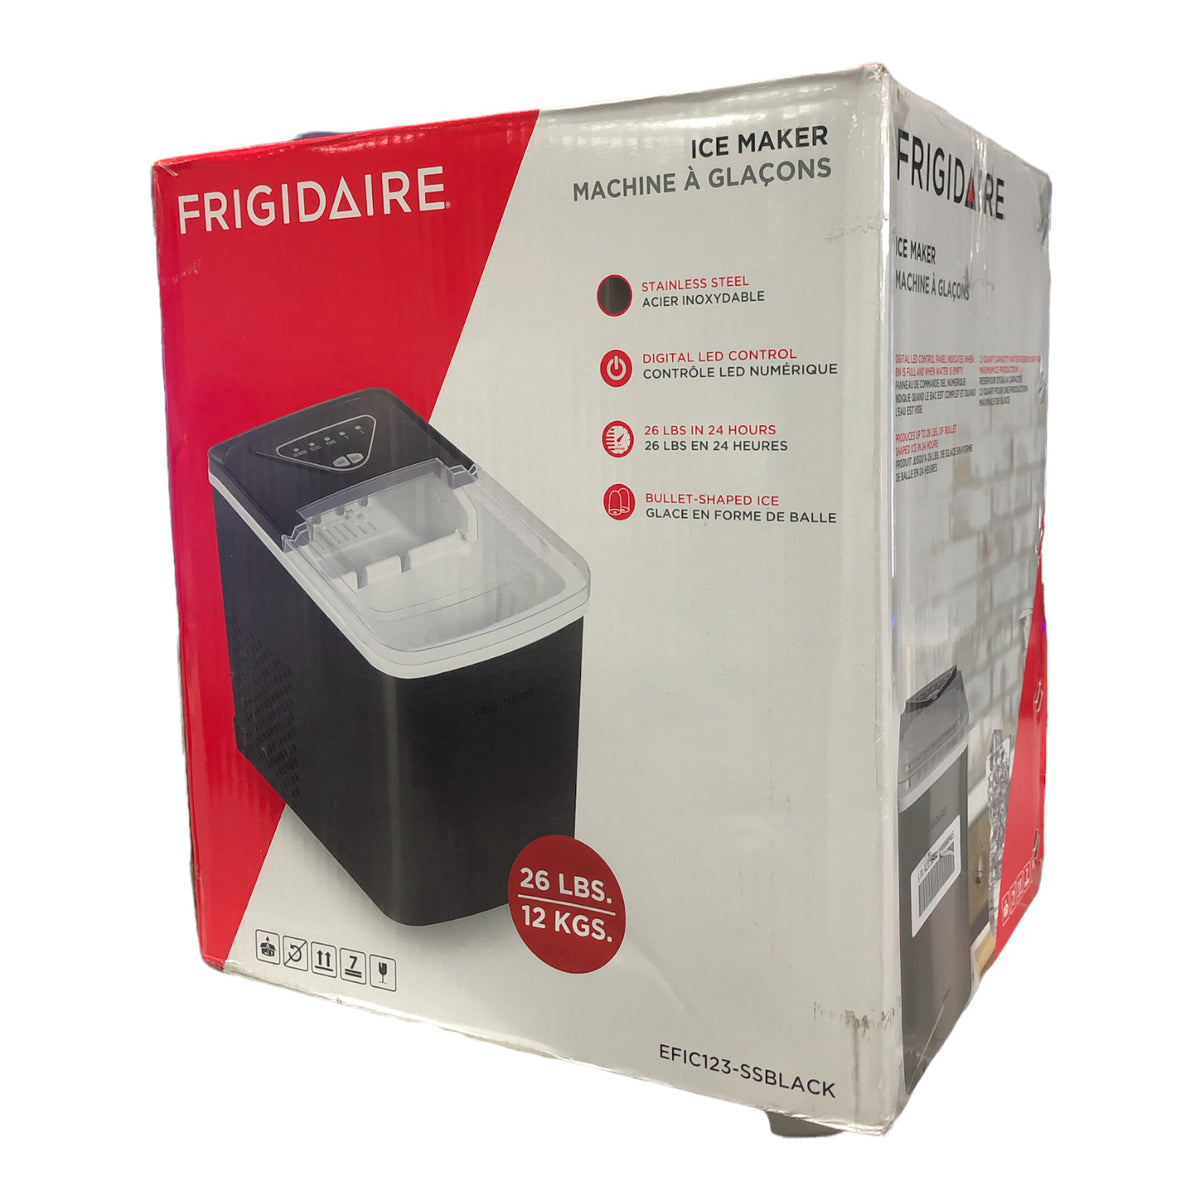 Frigidaire, 26 lbs. Ice Maker, Bullet-Shaped Ice, Stainless Steel